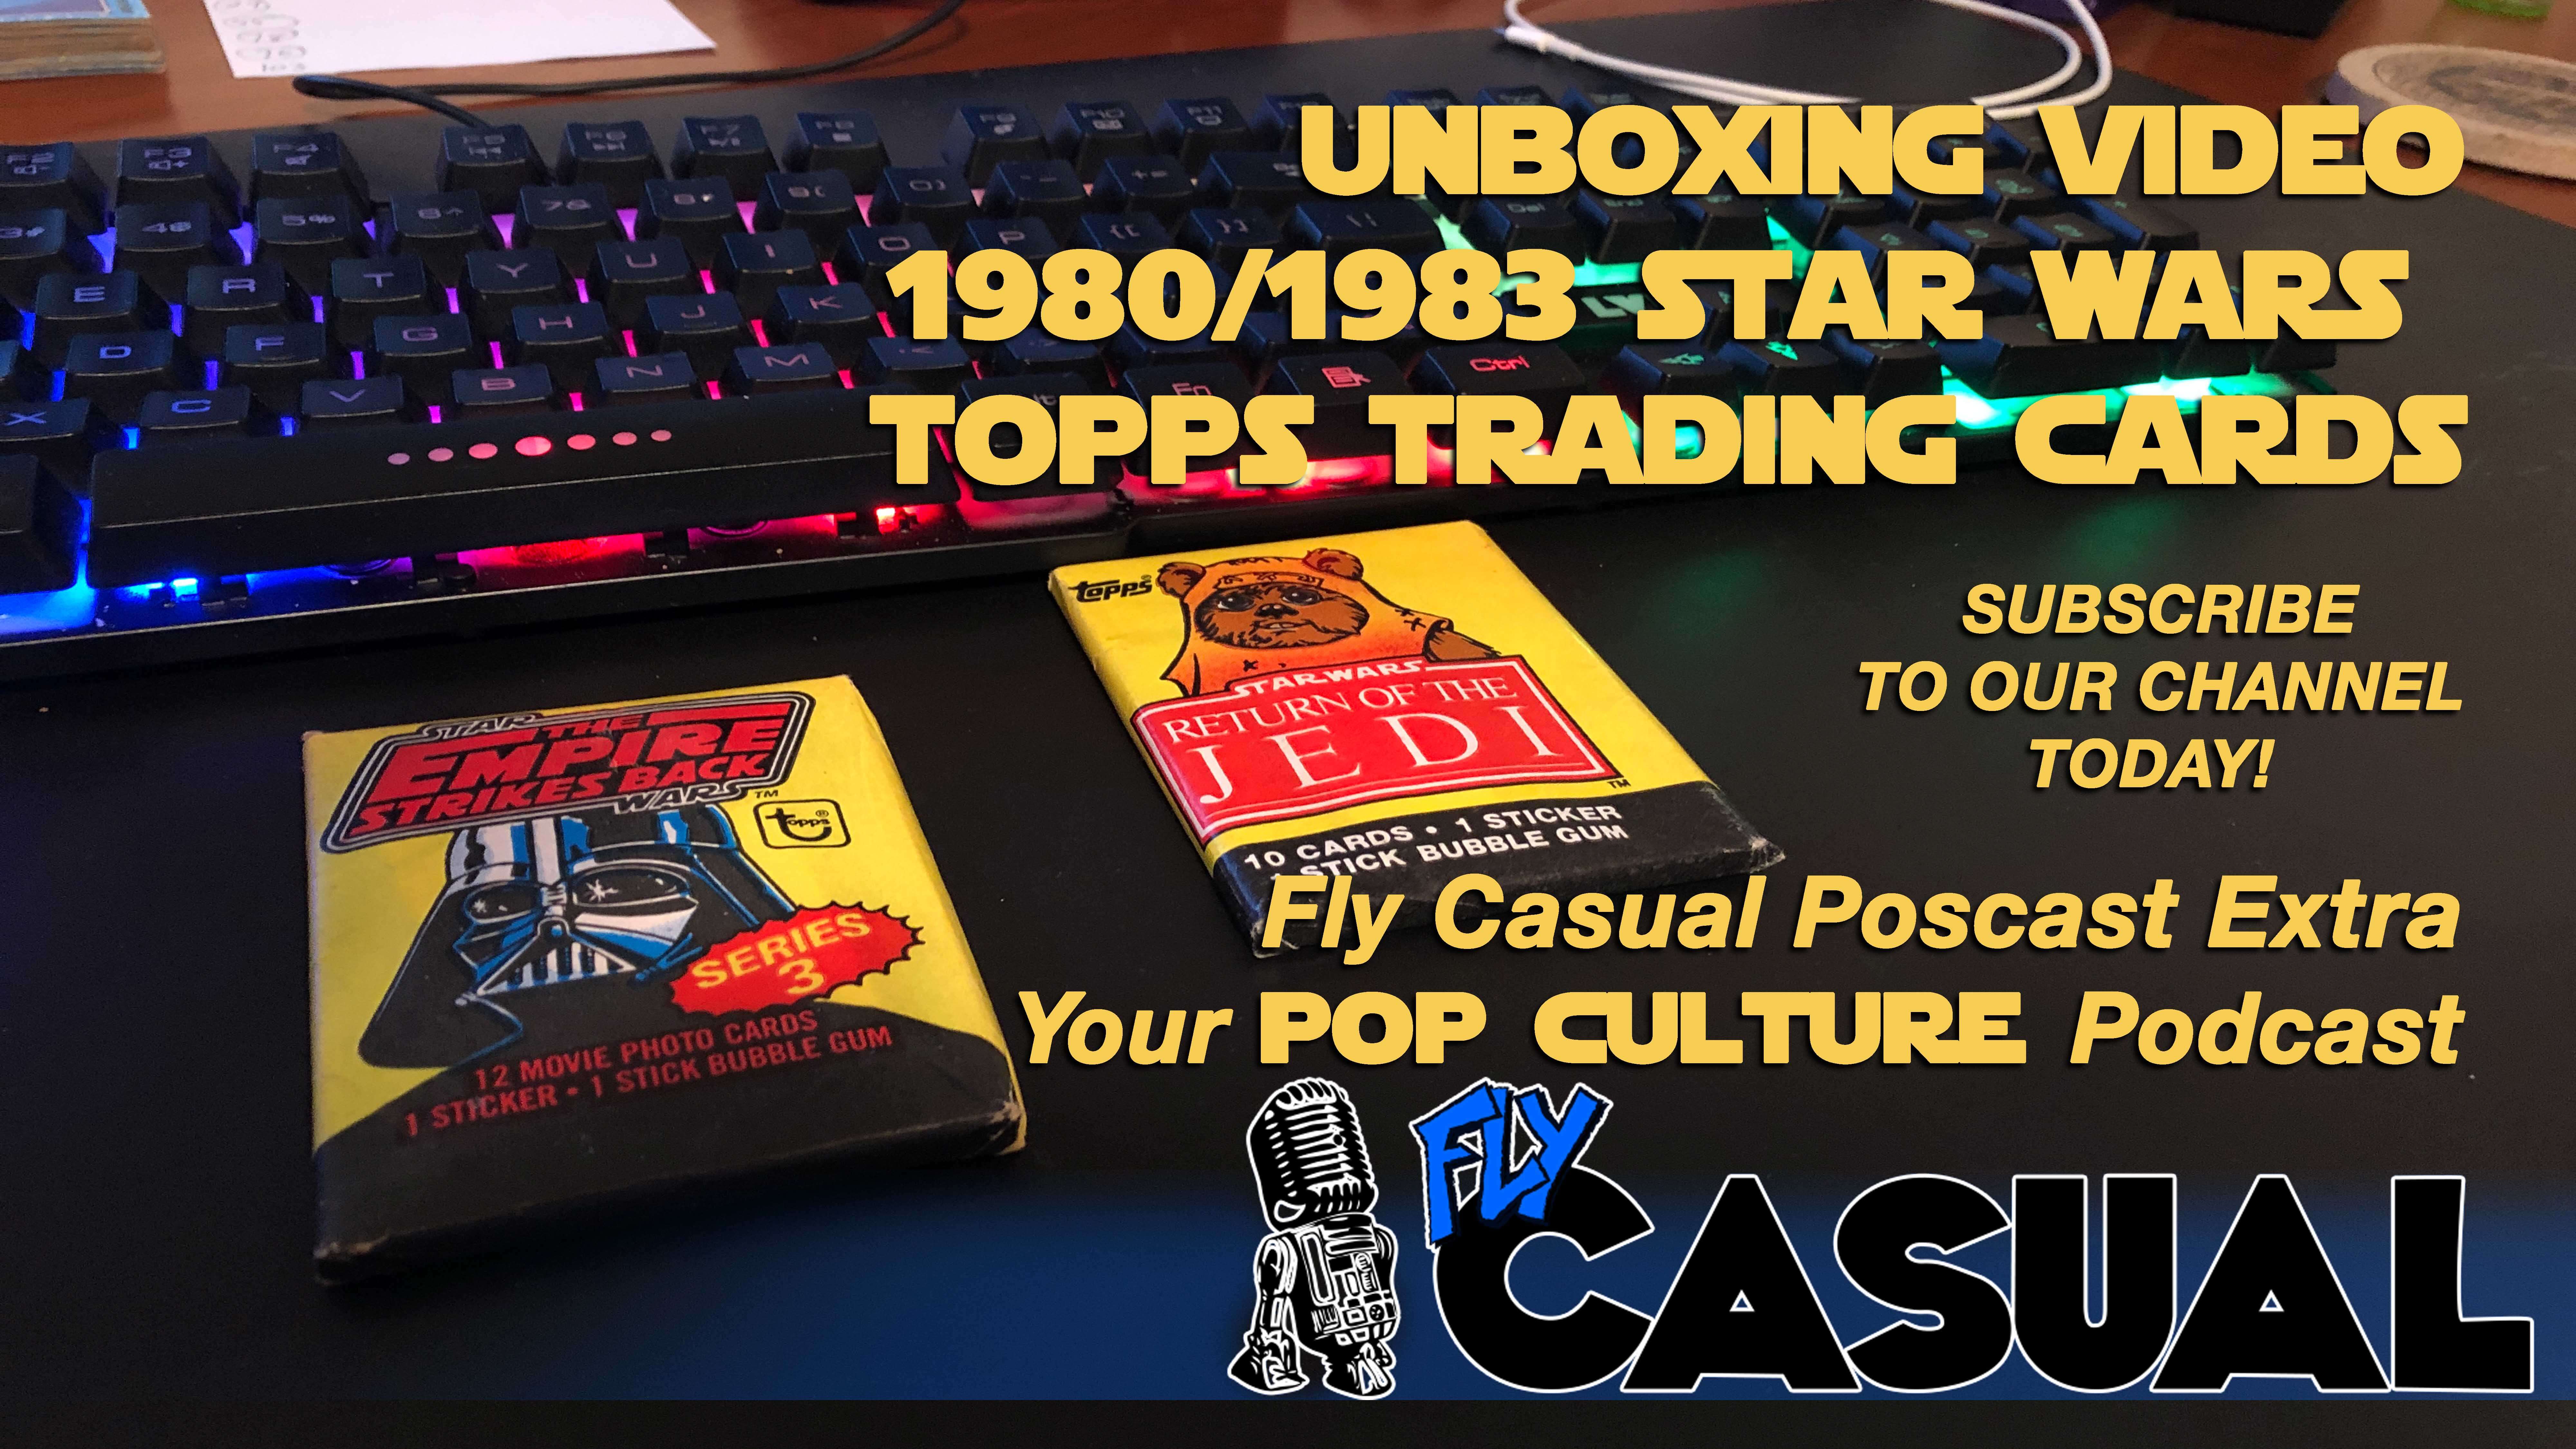 Unboxing Video | 1980 1983 Vintage Star Wars Topps Trading Cards | Fly Casual Podcast